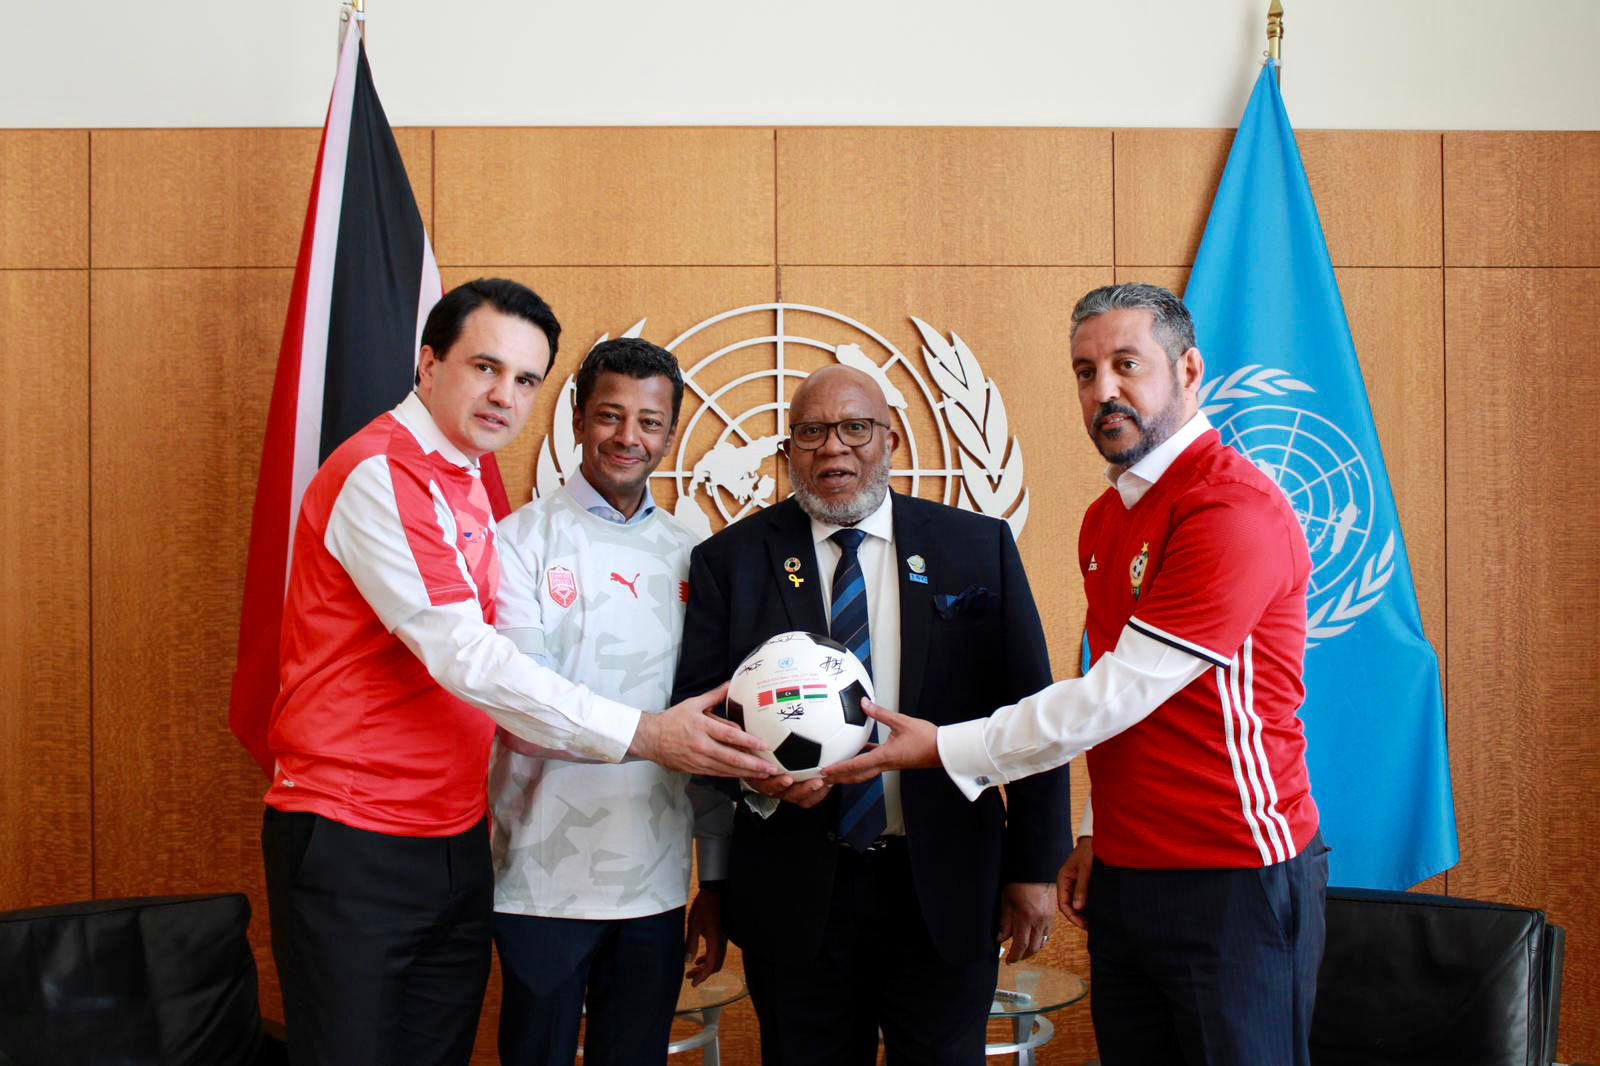 May 25 declared World Football Day by UN